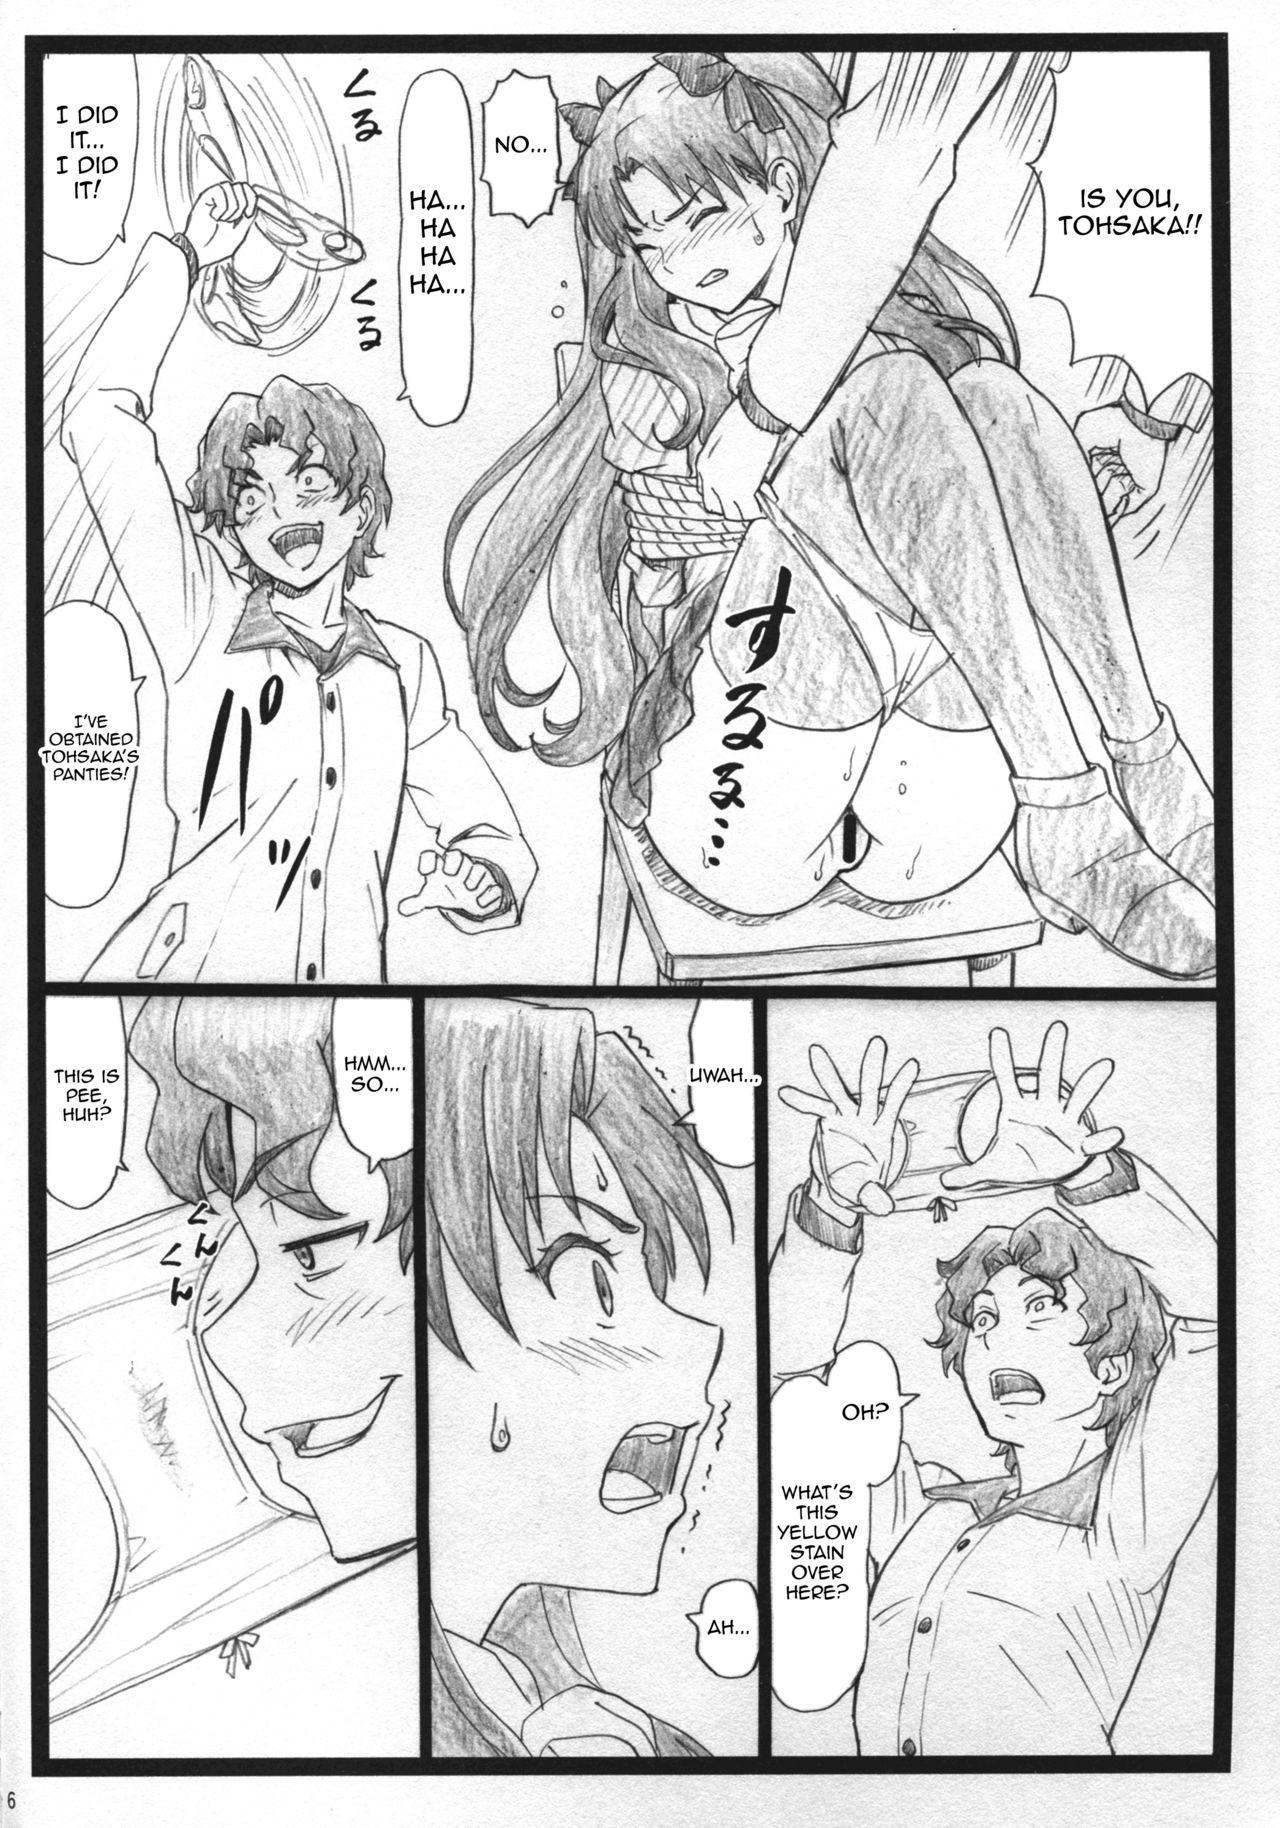 Tugging Rin to Shite... | With Rin... - Fate stay night Interracial Hardcore - Page 6